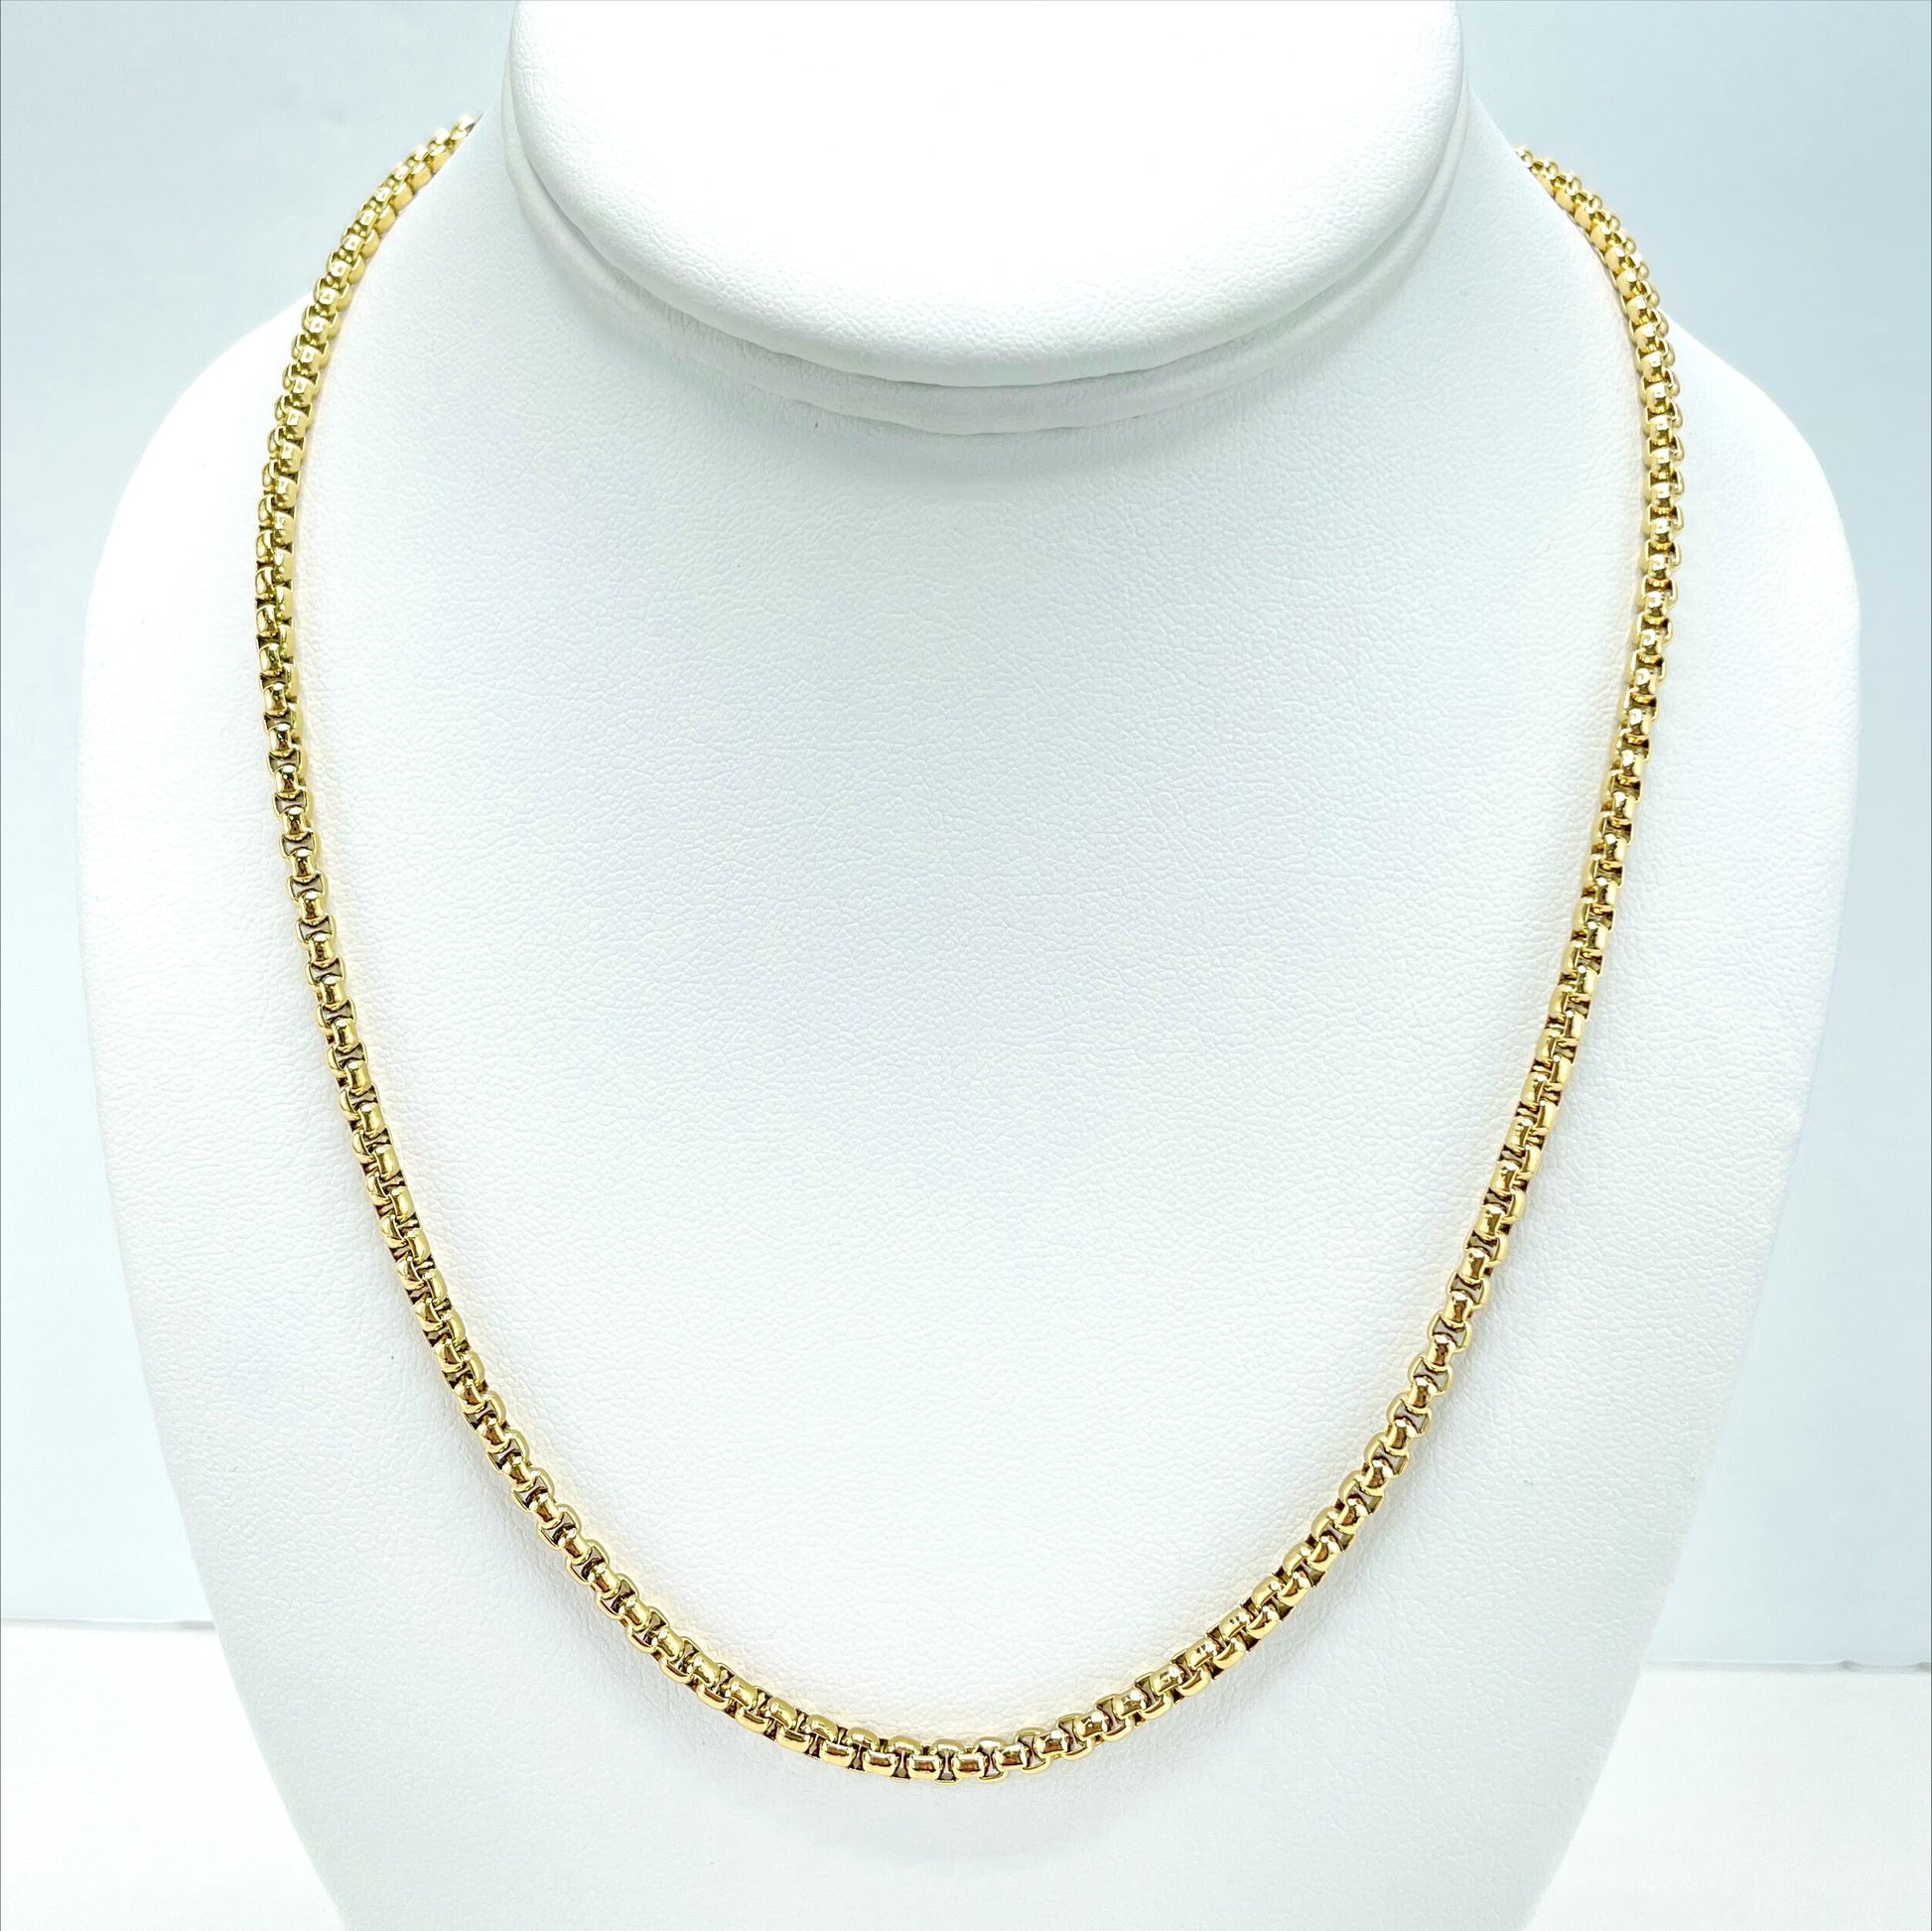 14k Gold Plated On Stainless Steel 3mm Box Chain Link Necklace 24" Long, Unisex Chain, Wholesale Jewelry Making Supplies